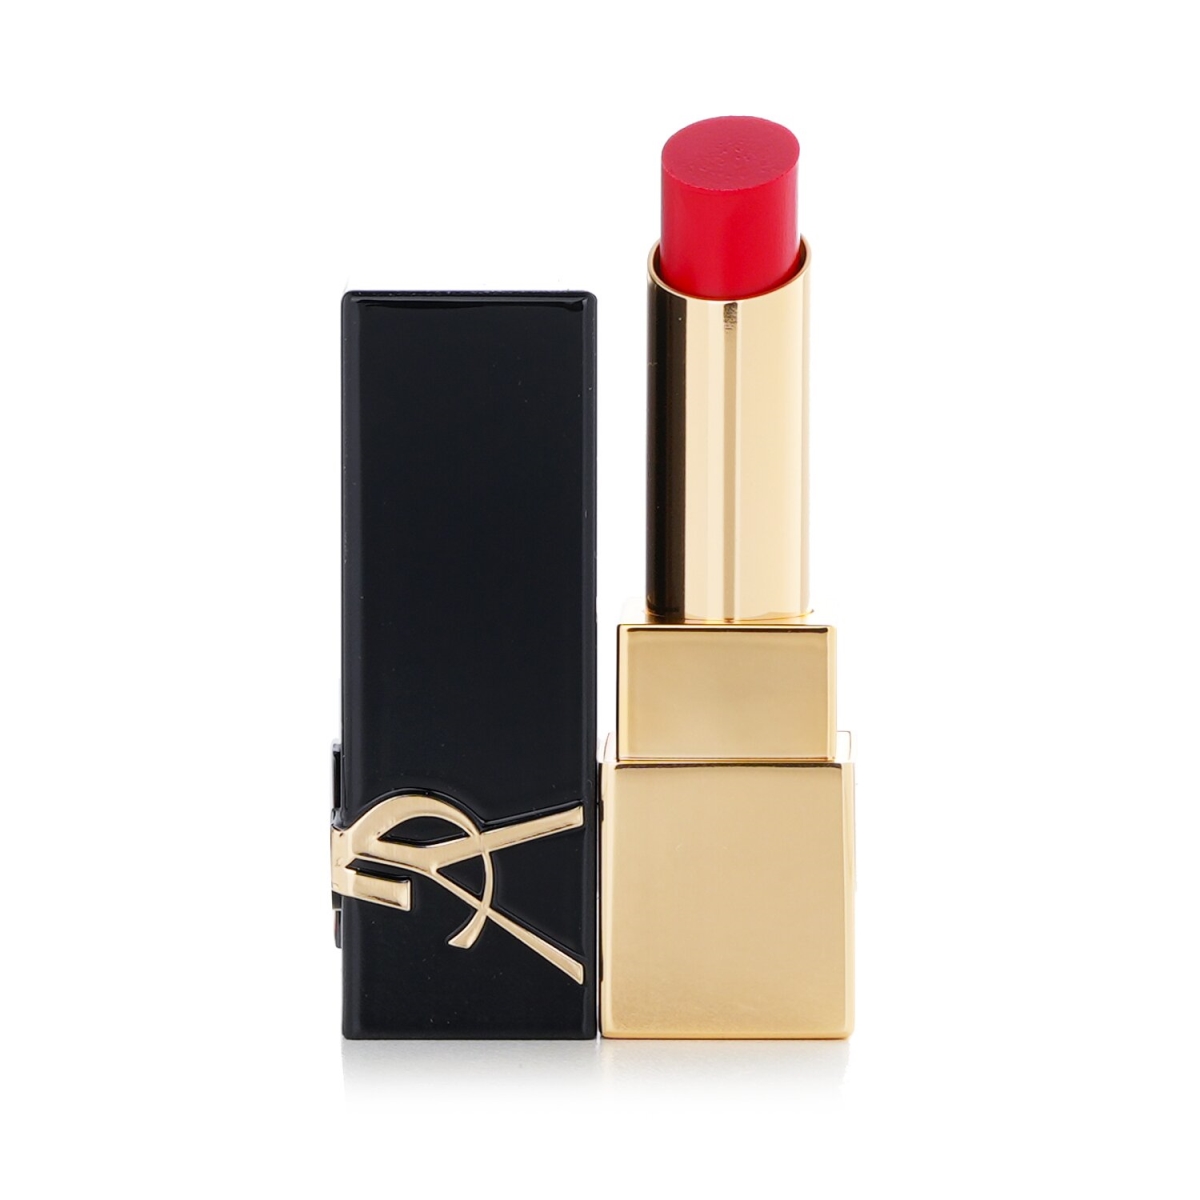 Picture of Yves Saint Laurent 279504 0.11 oz Rouge Pur Couture the Bold Lipstick, No.7 Unhibited Flame